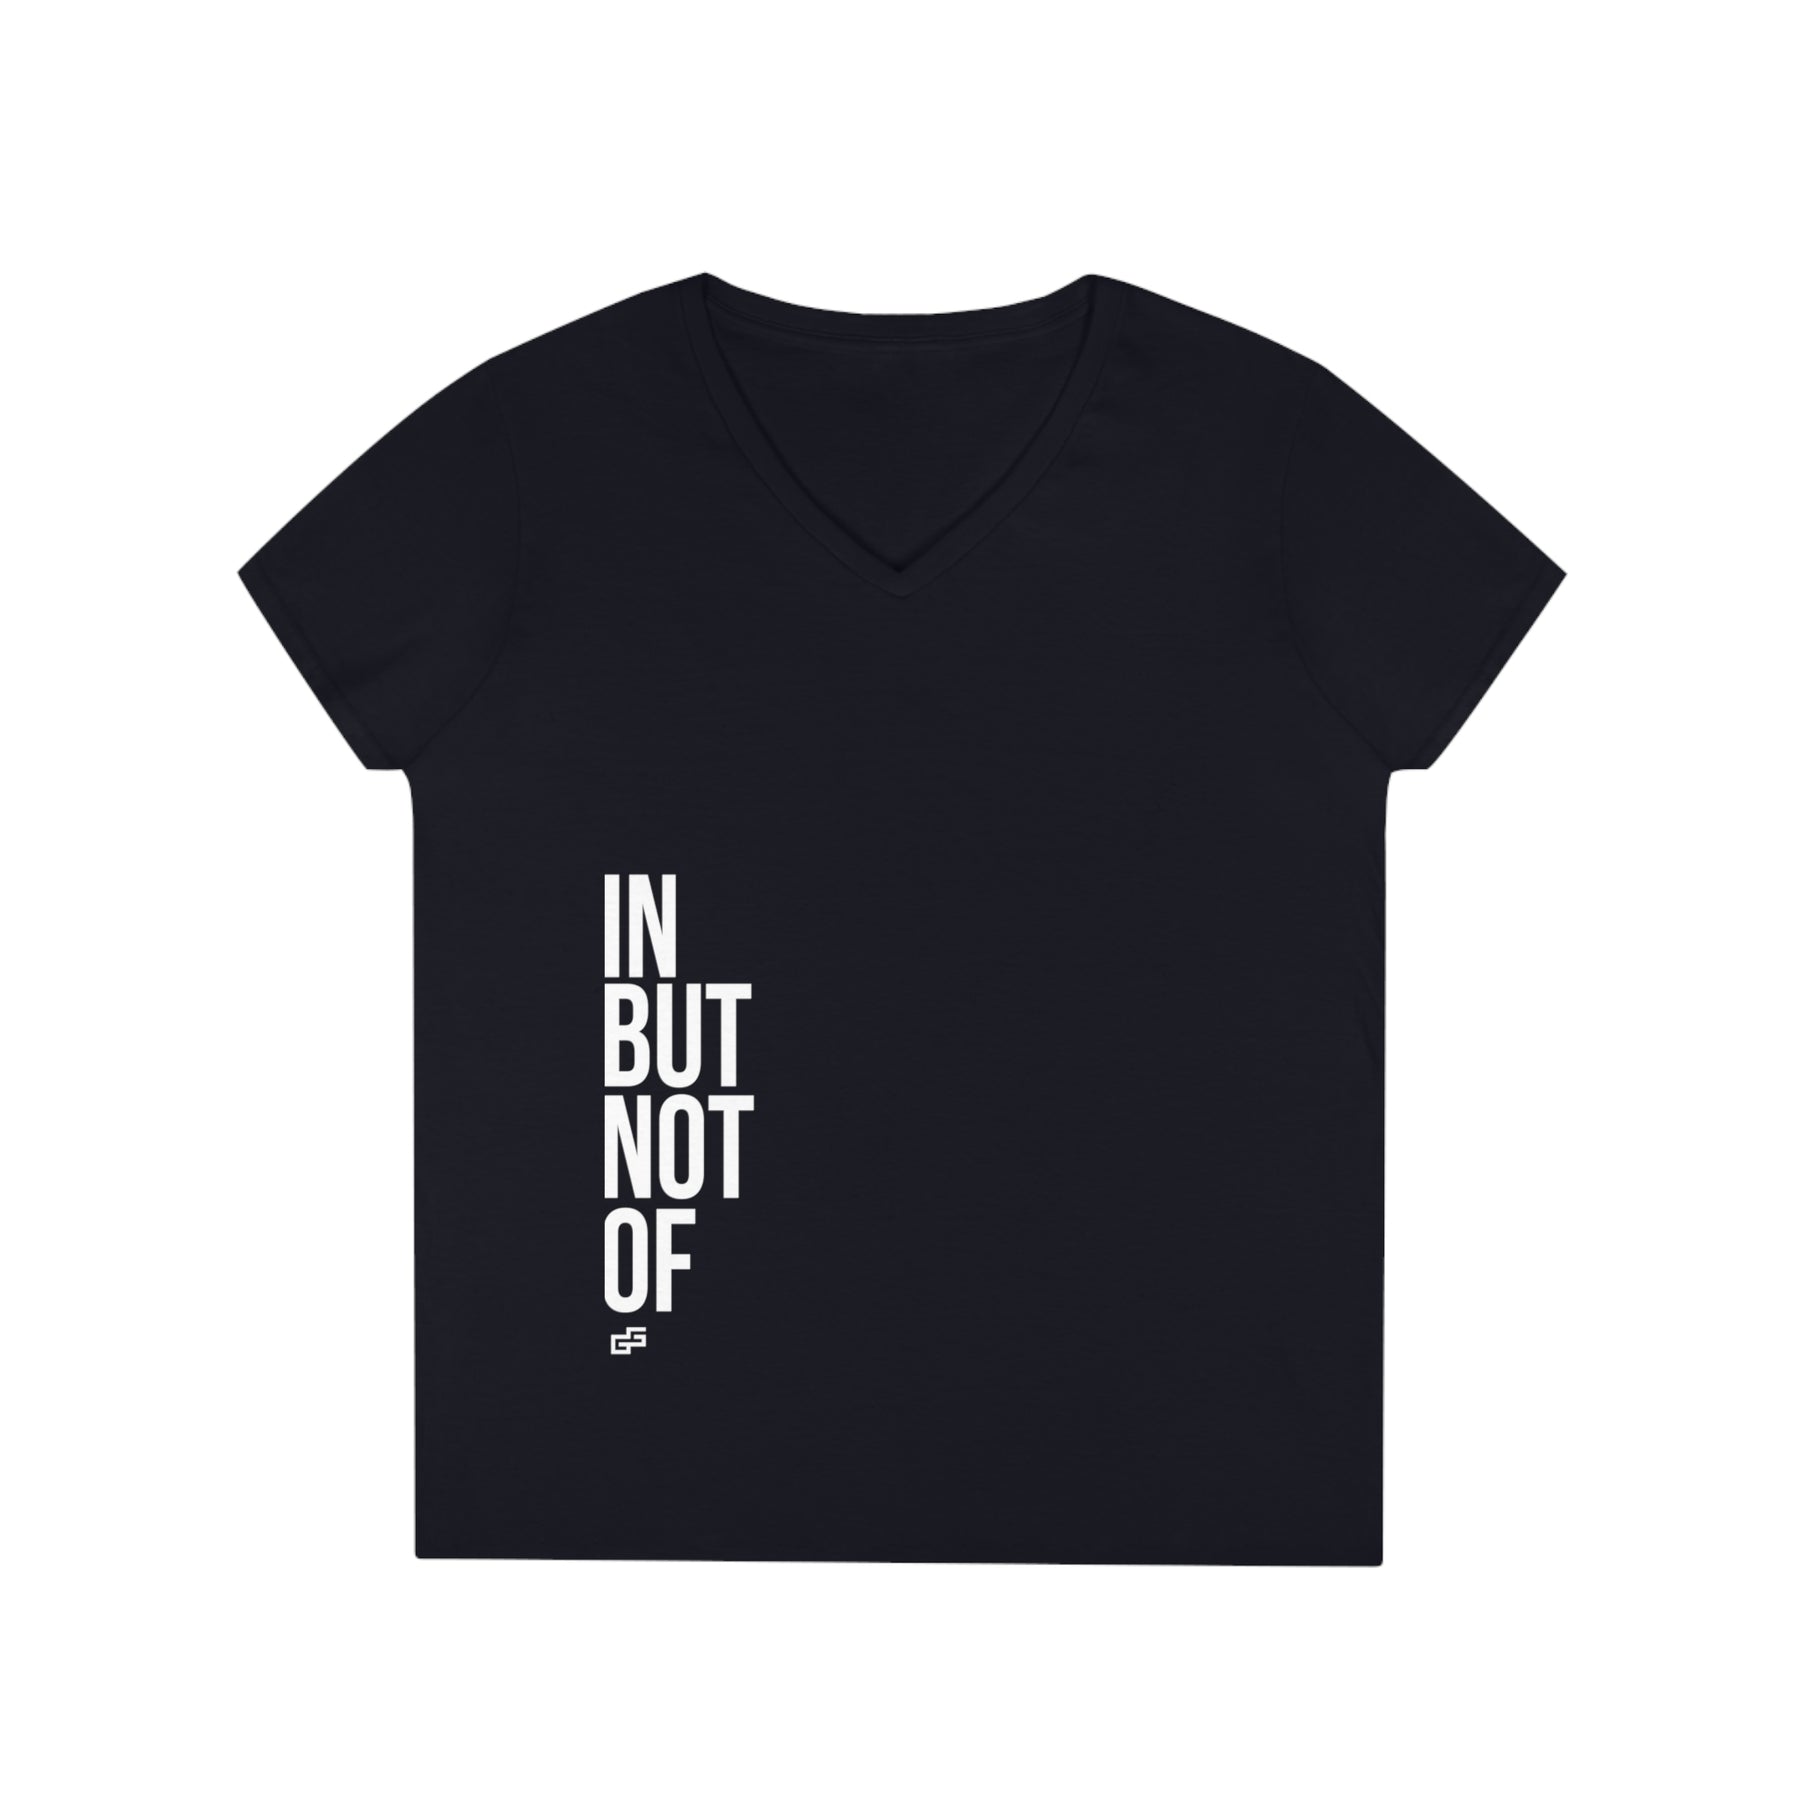 Bold "IN BUT NOT OF" Ladies' V-Neck T-Shirt